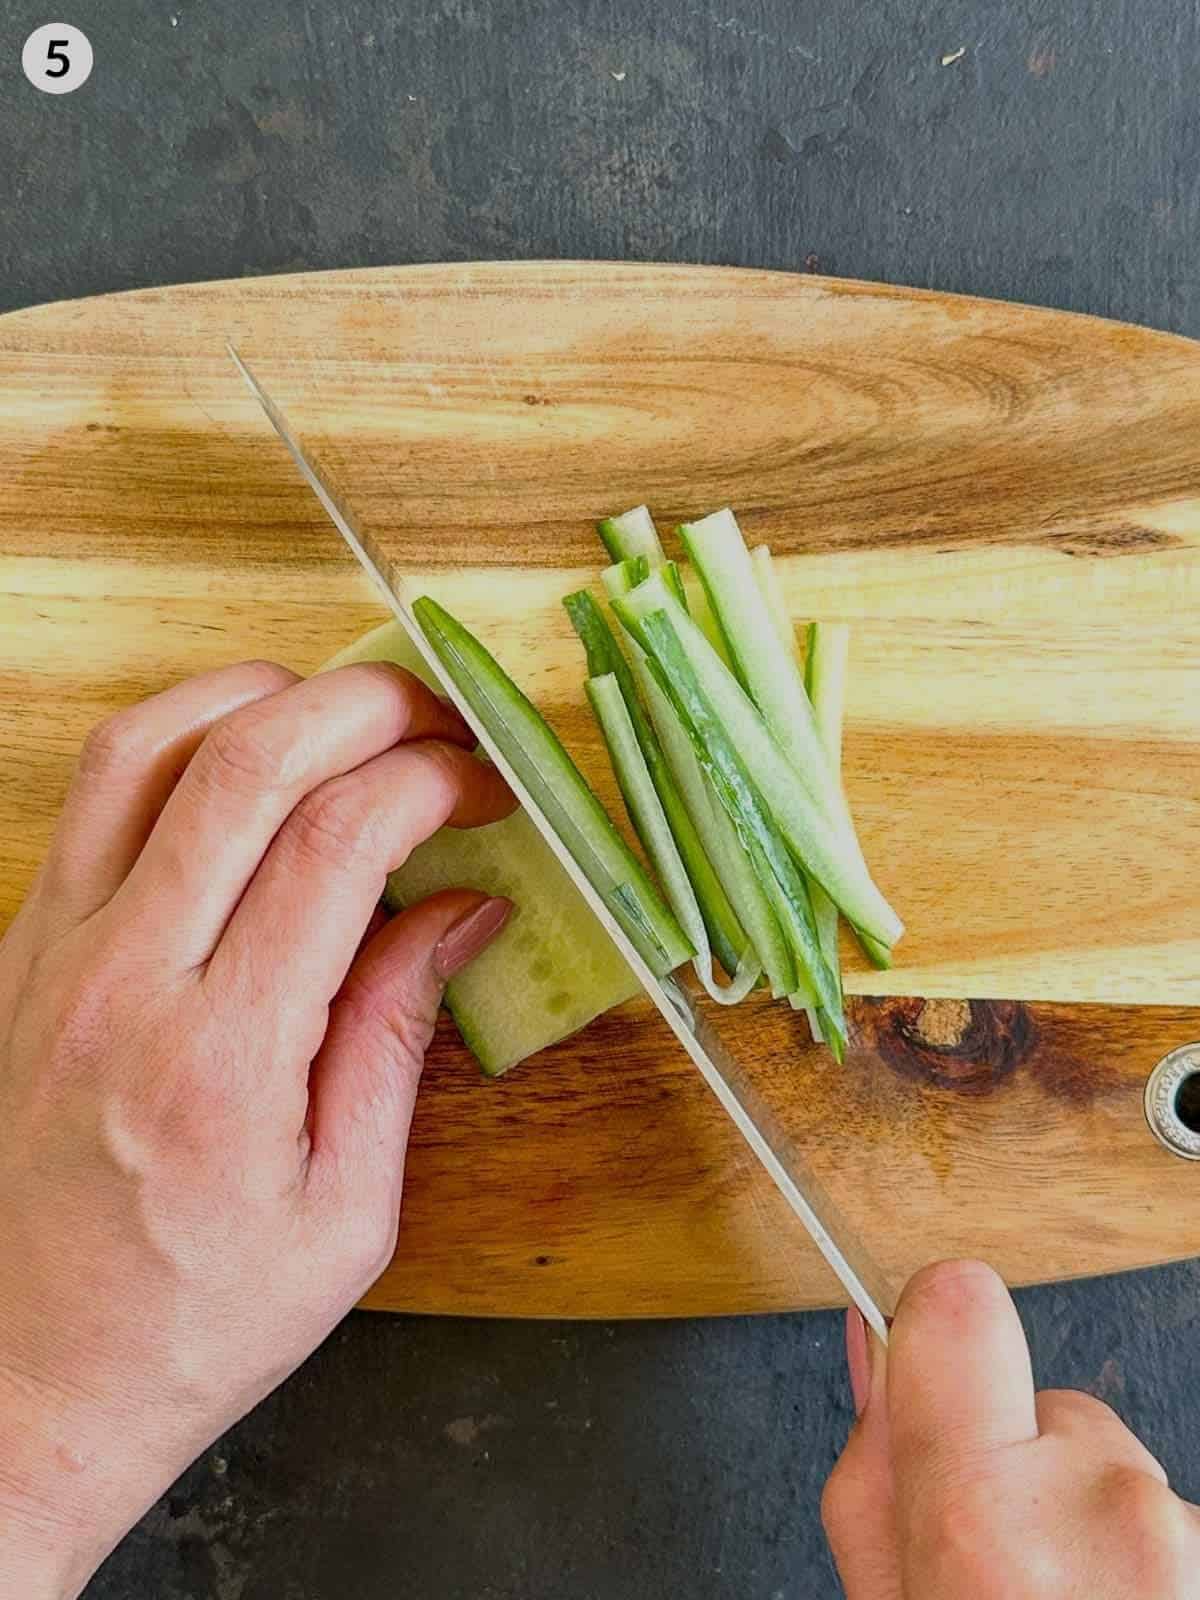 Chopping cucumber with a knife on a wooden board